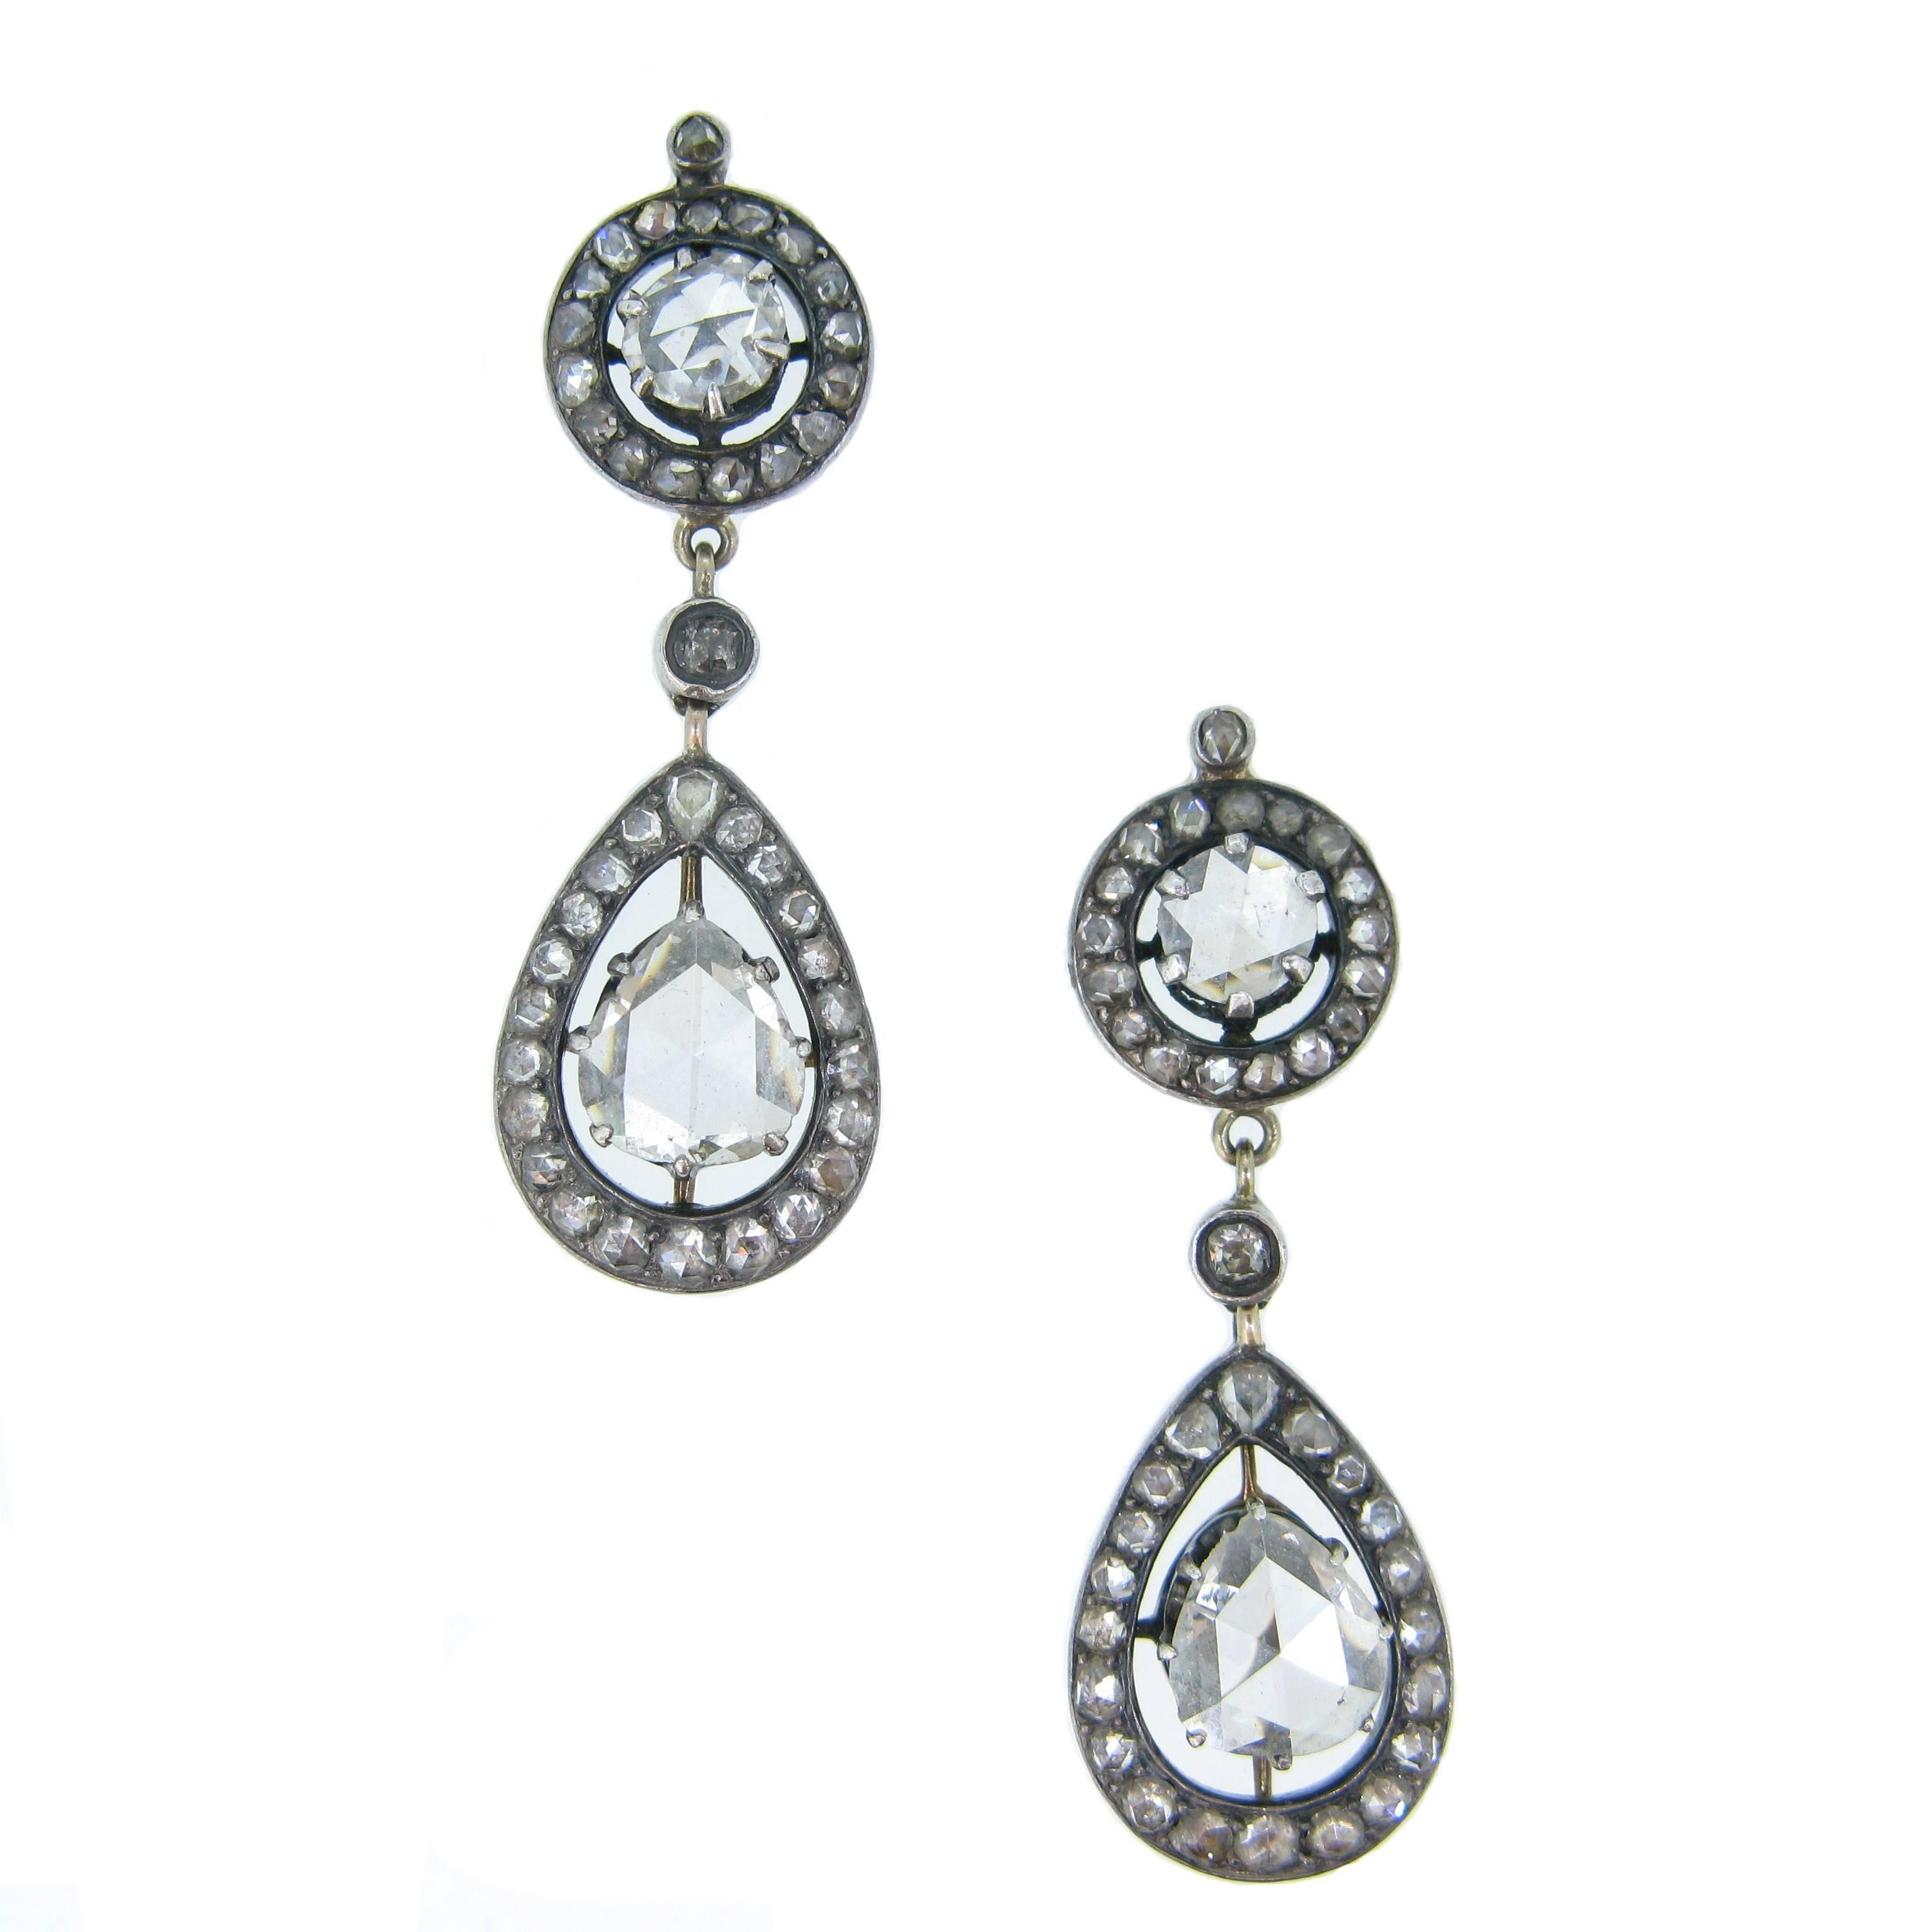 A unique pair of diamonds drops earrings. The tops are set with round rose cut diamonds, surrounded with 18 rose diamonds and the bottoms have a pear shapes. The pear shape rose cut diamond are around 1ct. They are also surrounded with 22 rose.